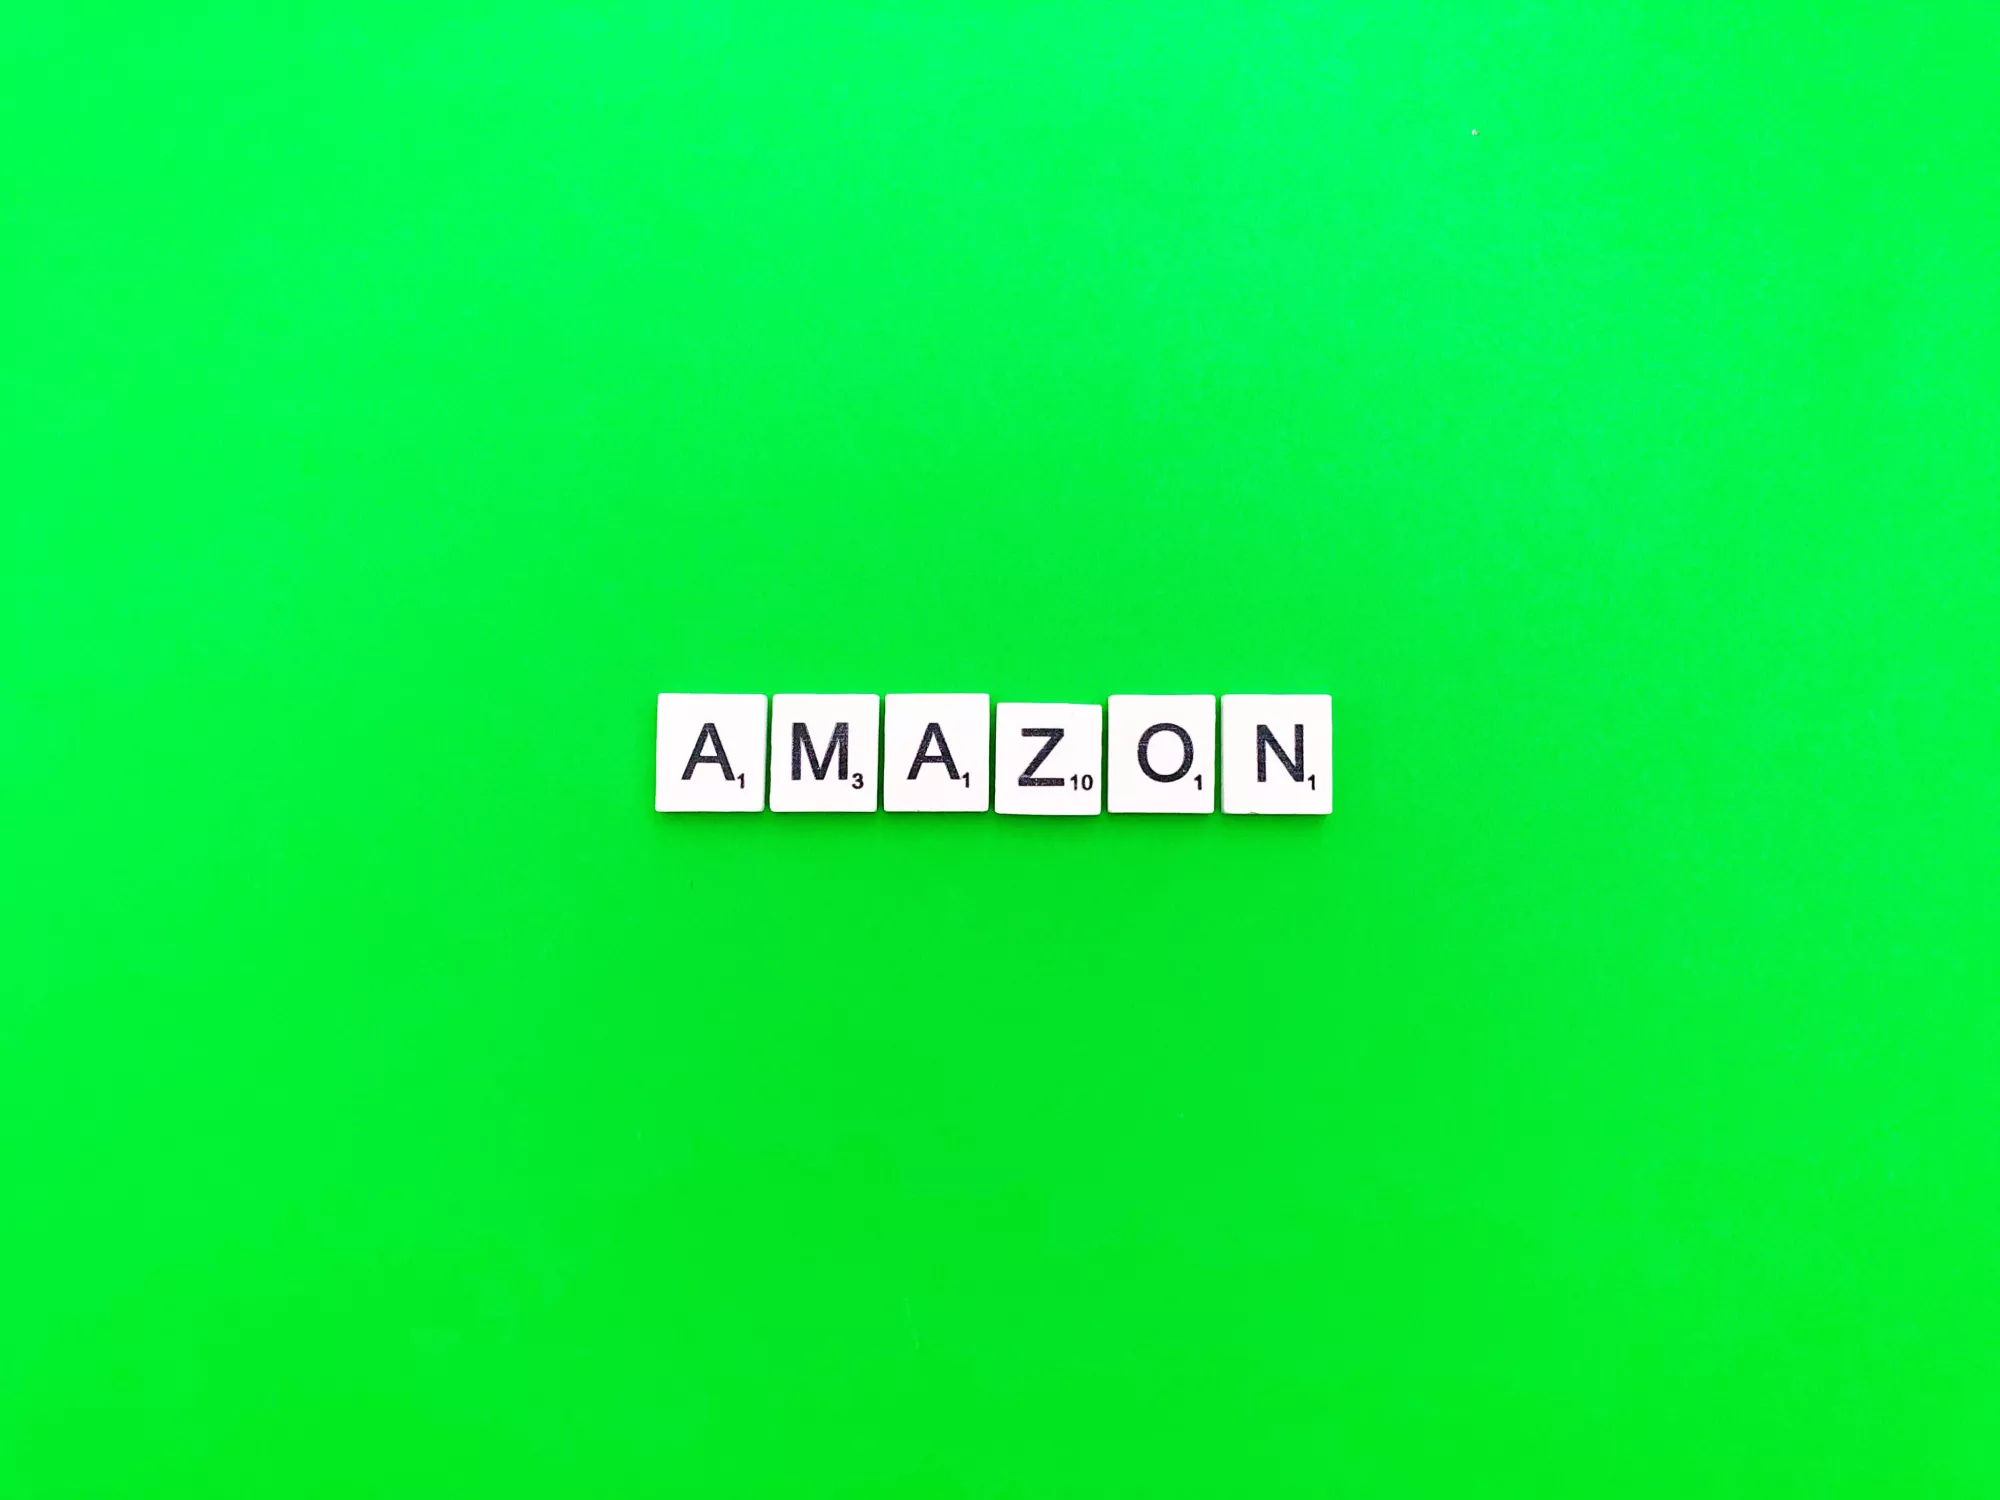 The word Amazon written with a bright green background to represent selling CBD on Amazon.